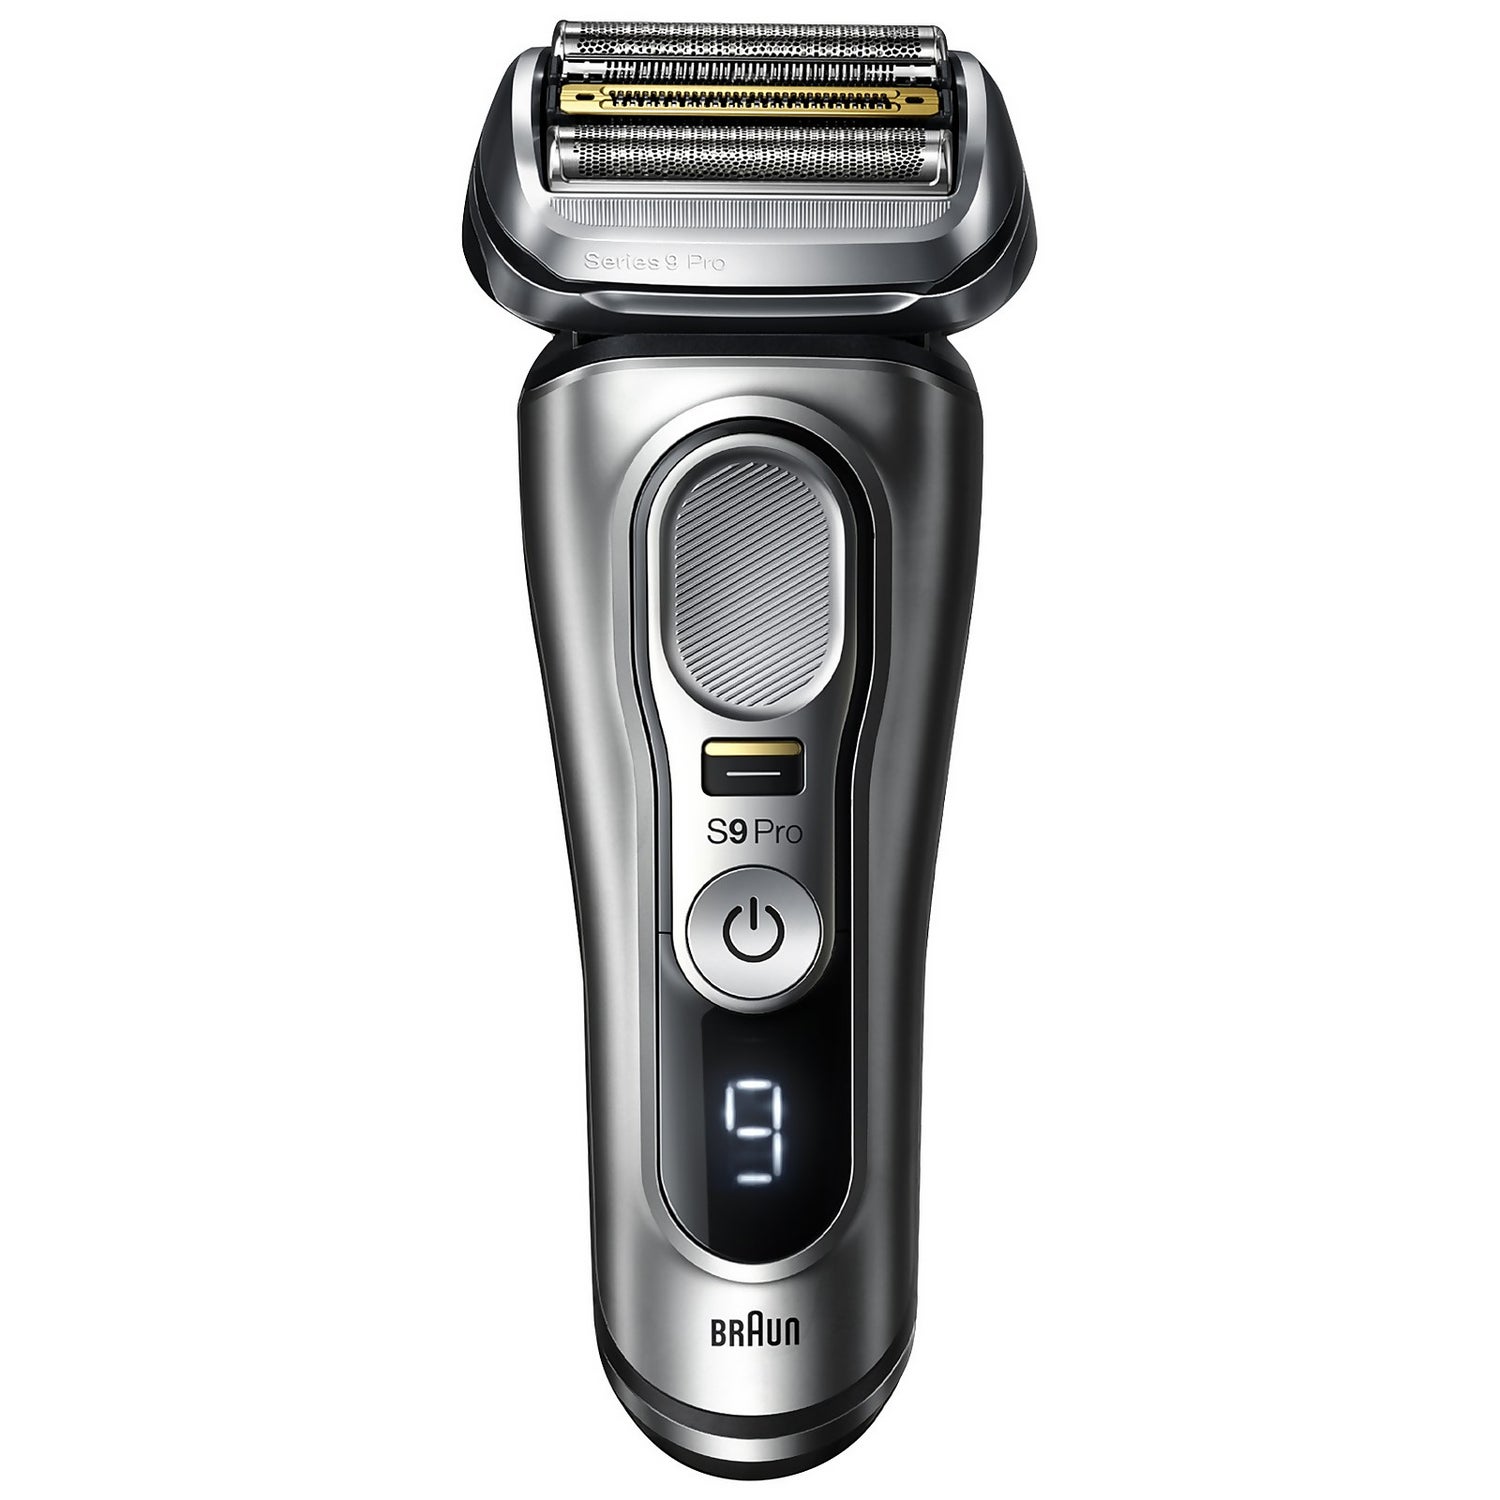 Braun Series 9 Pro 9477cc Wet/Dry Self-Cleaning Shaver